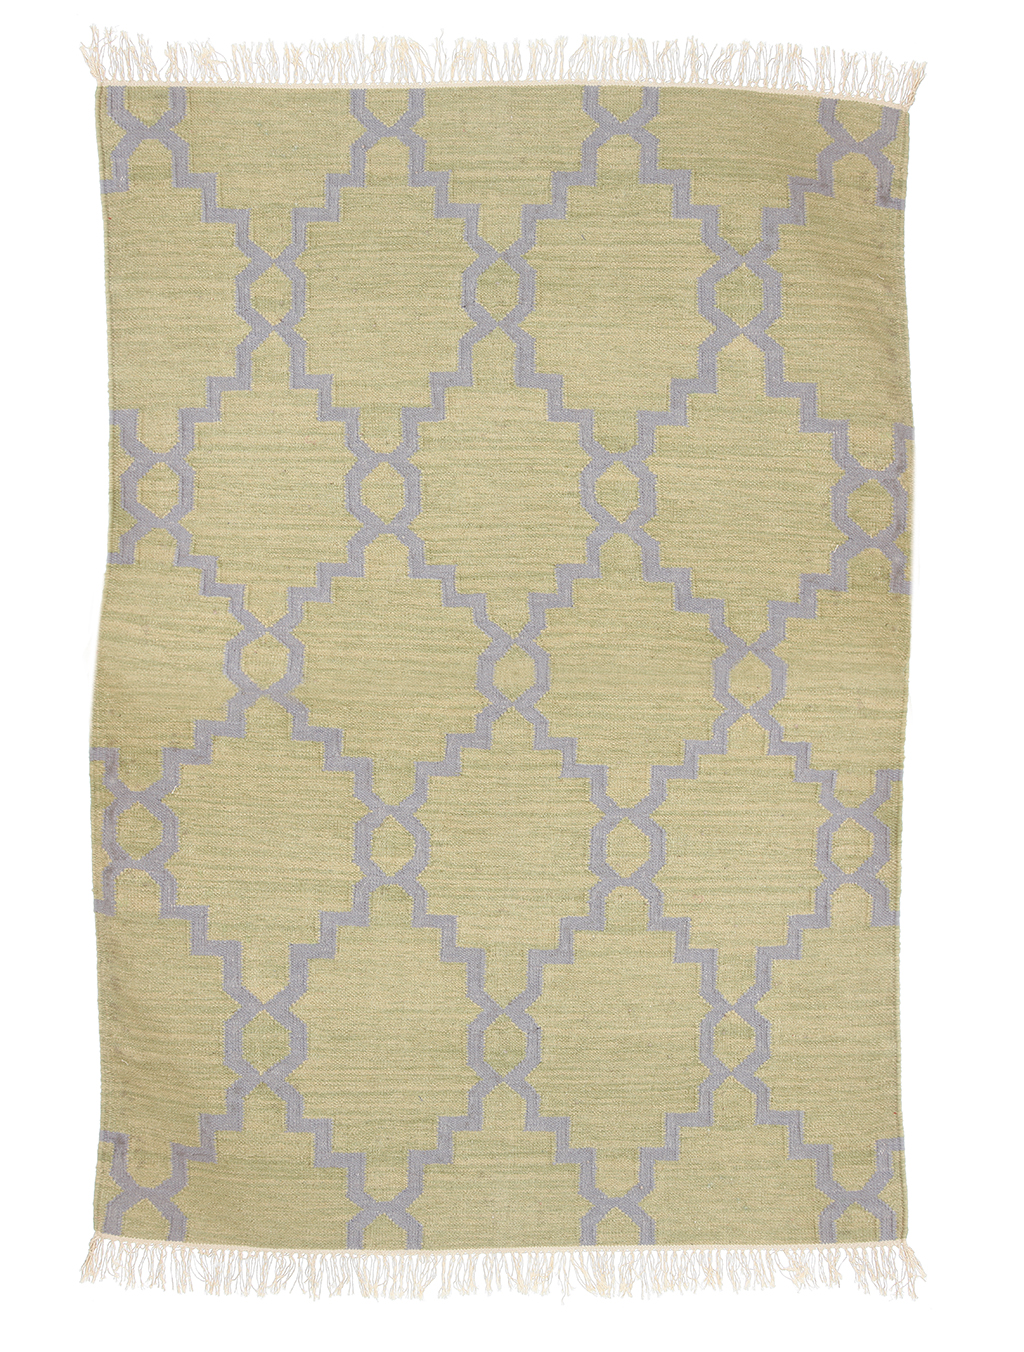 JALI-Moss green & Ice Blue wool & cotton Dhurrie (rug) - Mahout Lifestyle